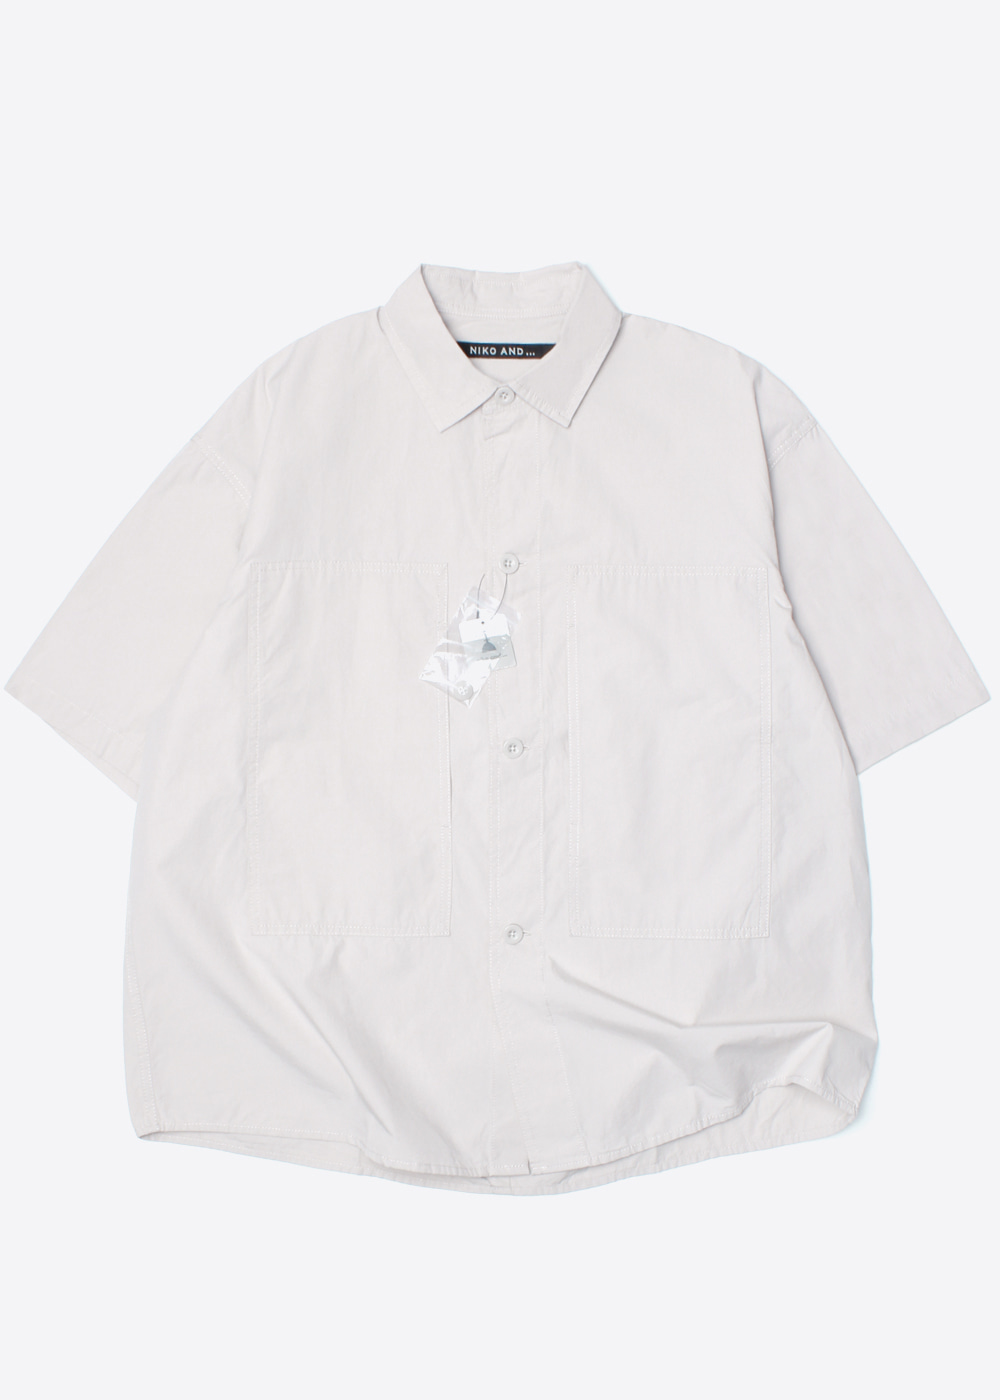 NIKO AND’over fit’ cotton big pocket two-piece shirt